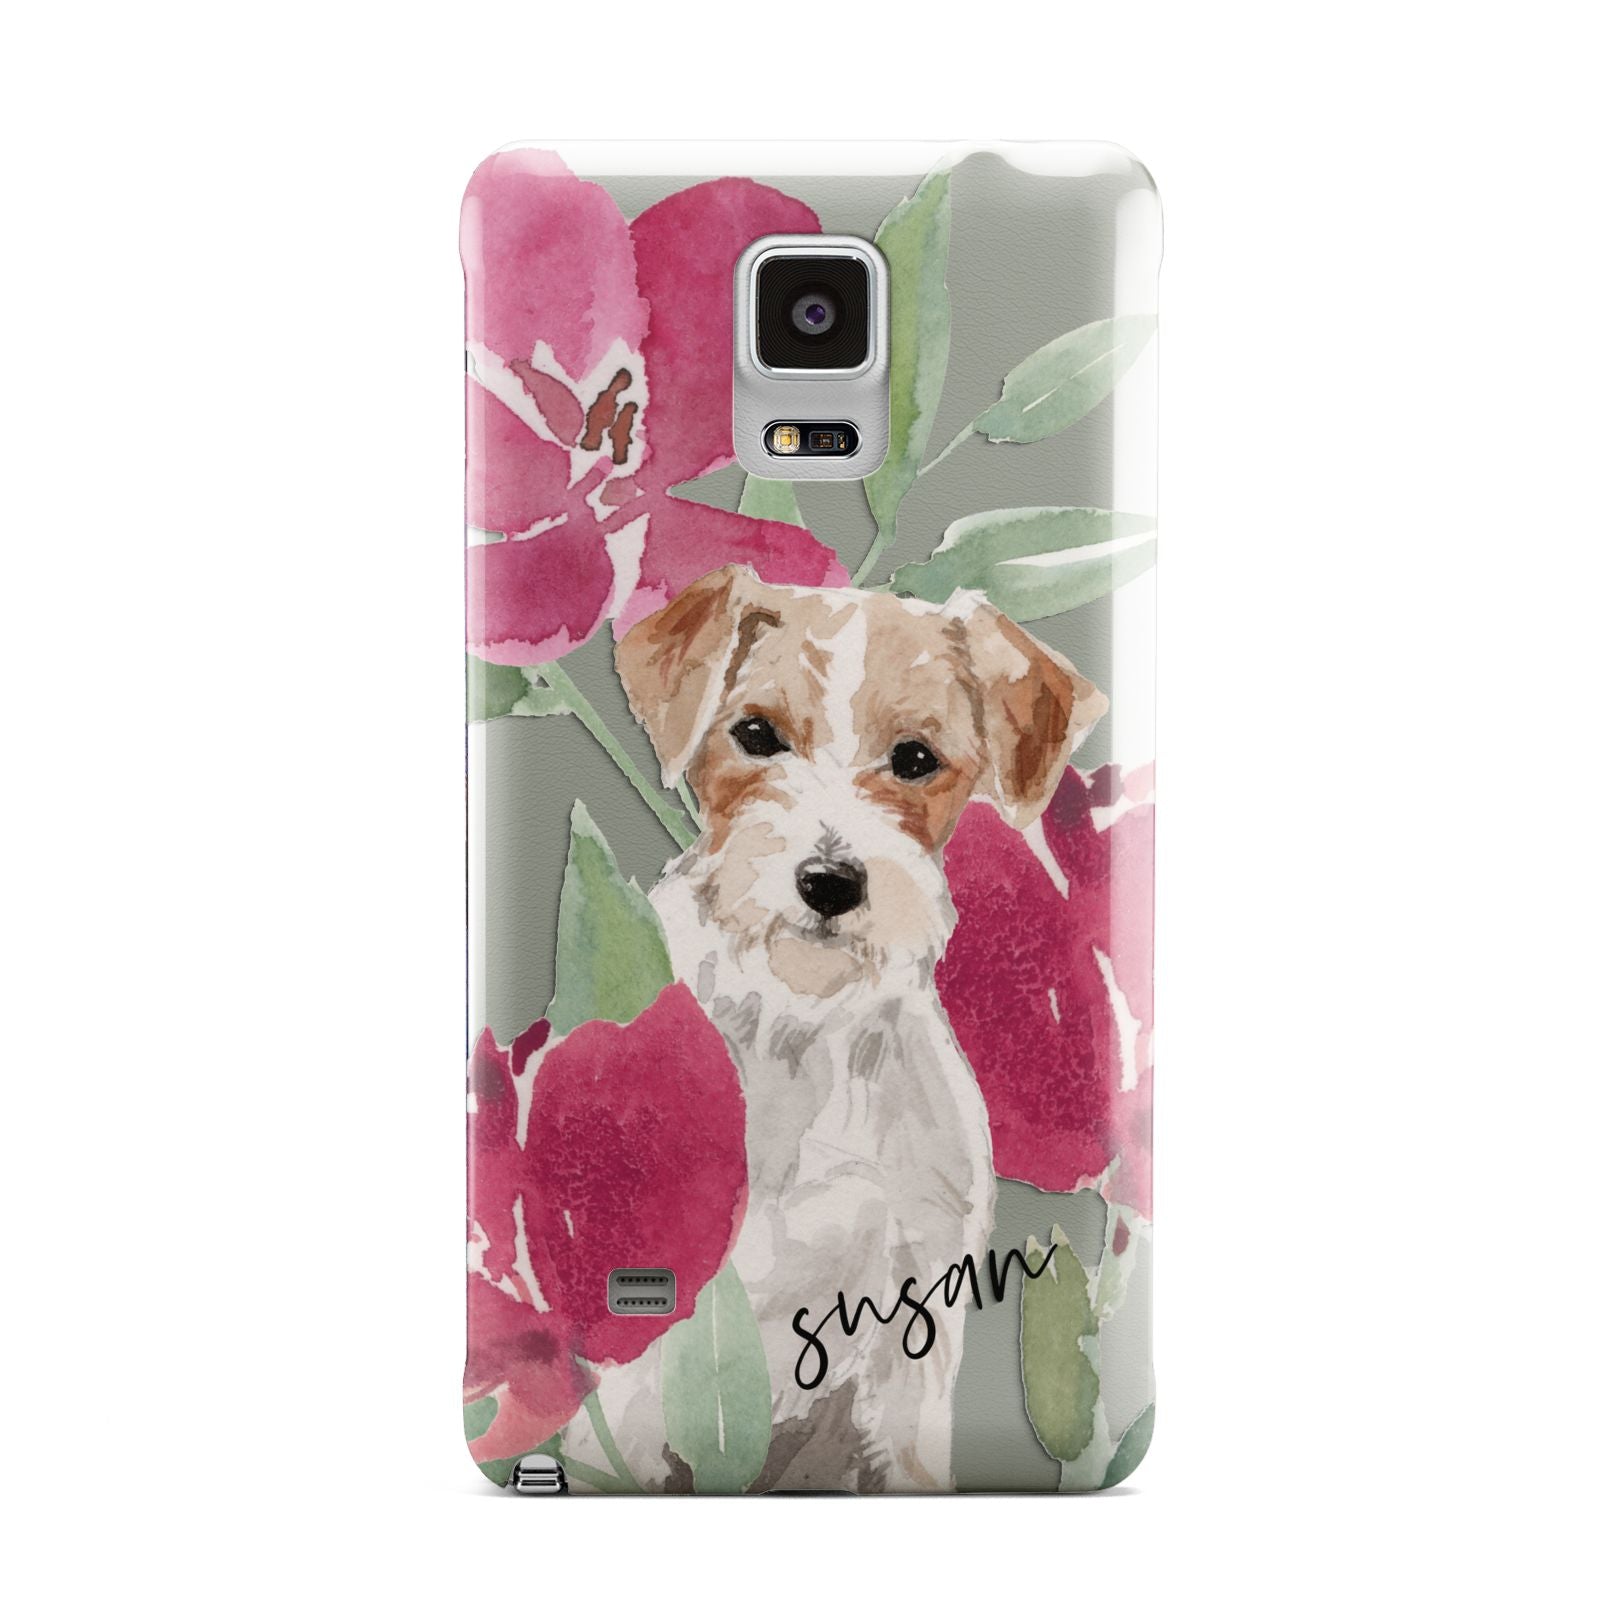 Personalised Jack Russel Samsung Galaxy Note 4 Case